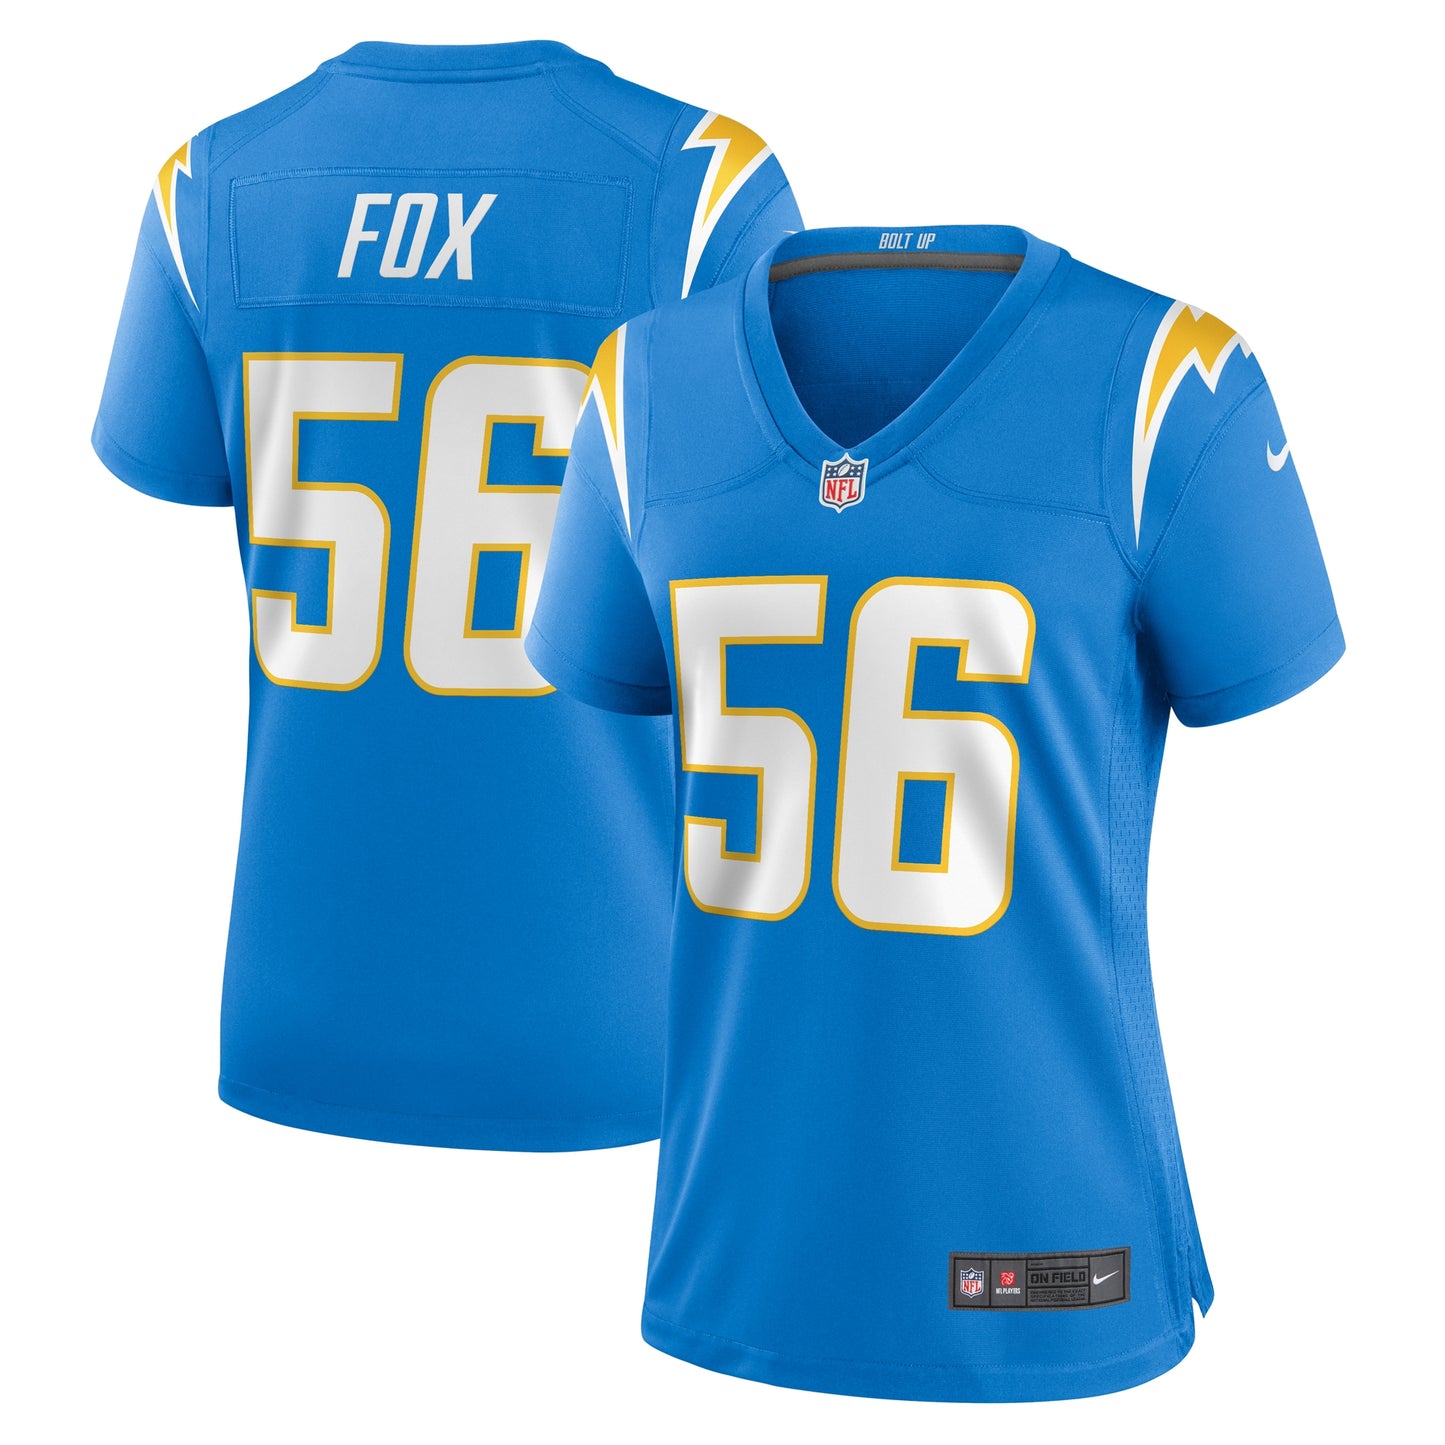 Morgan Fox Los Angeles Chargers Nike Women's Player Game Jersey - Powder Blue